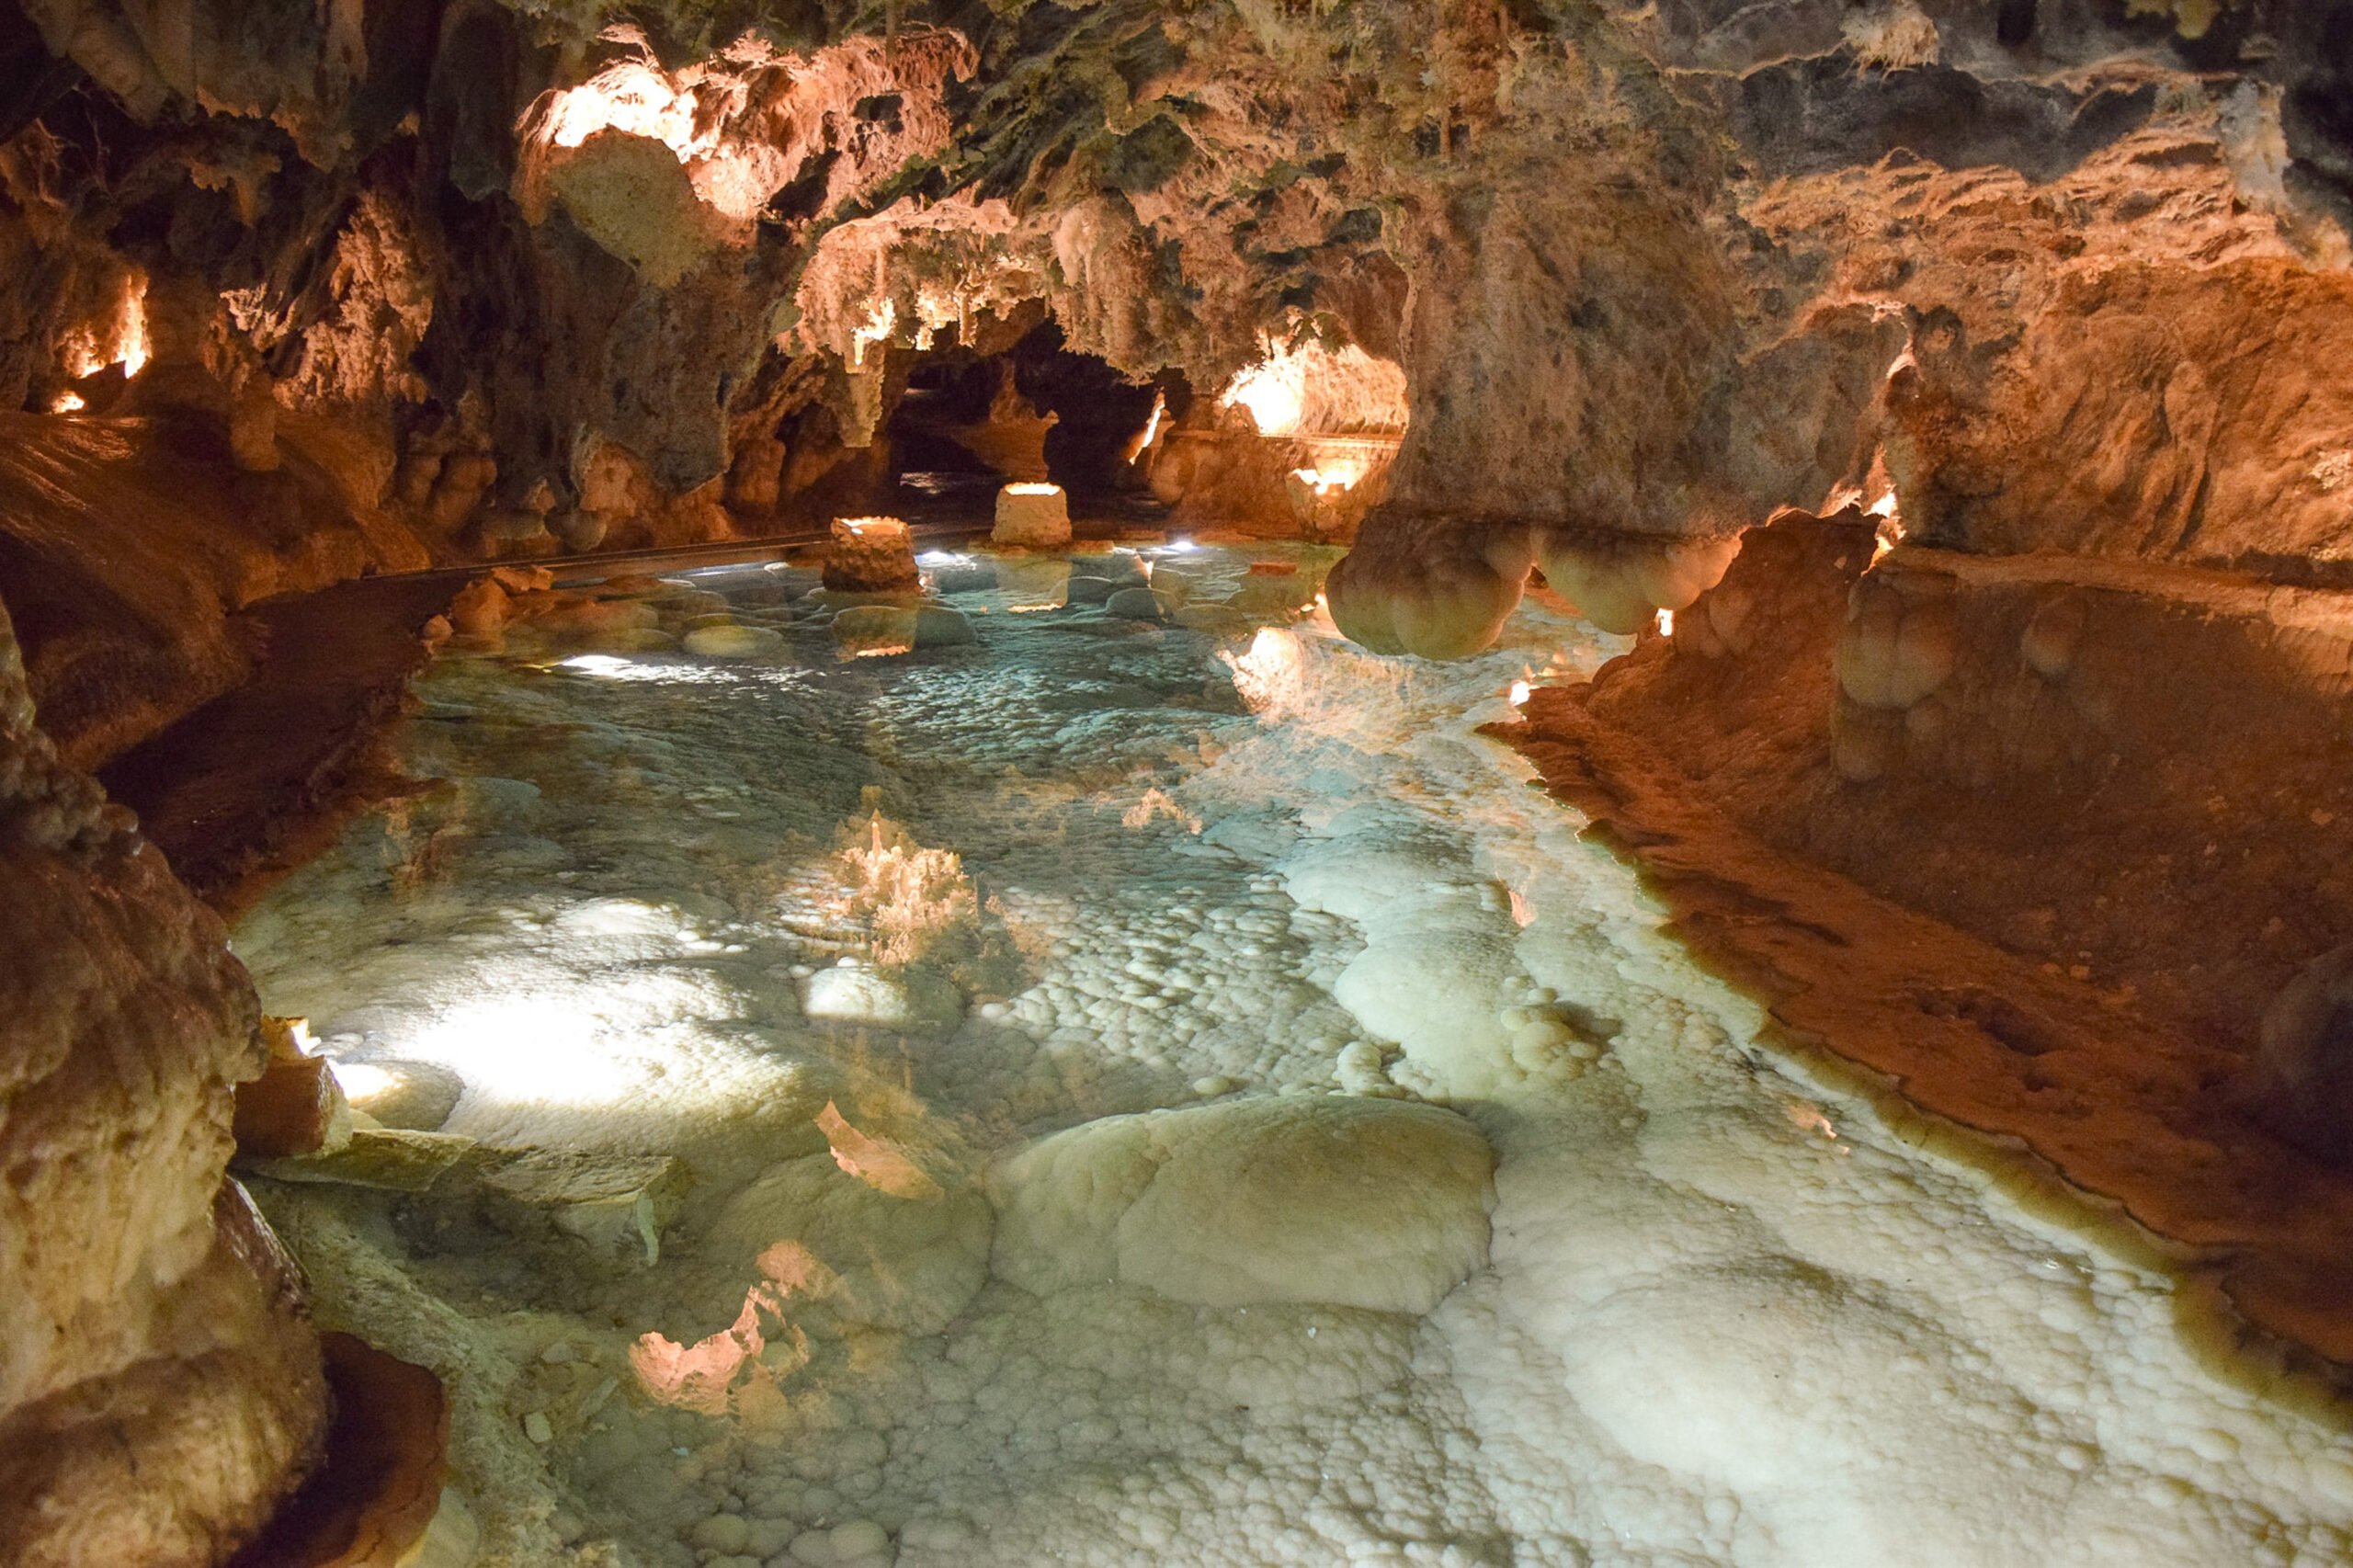 Explore The Grottos Of The Marvel On The Iberian Ham Tasting And Aracena Cave Tour From Seville